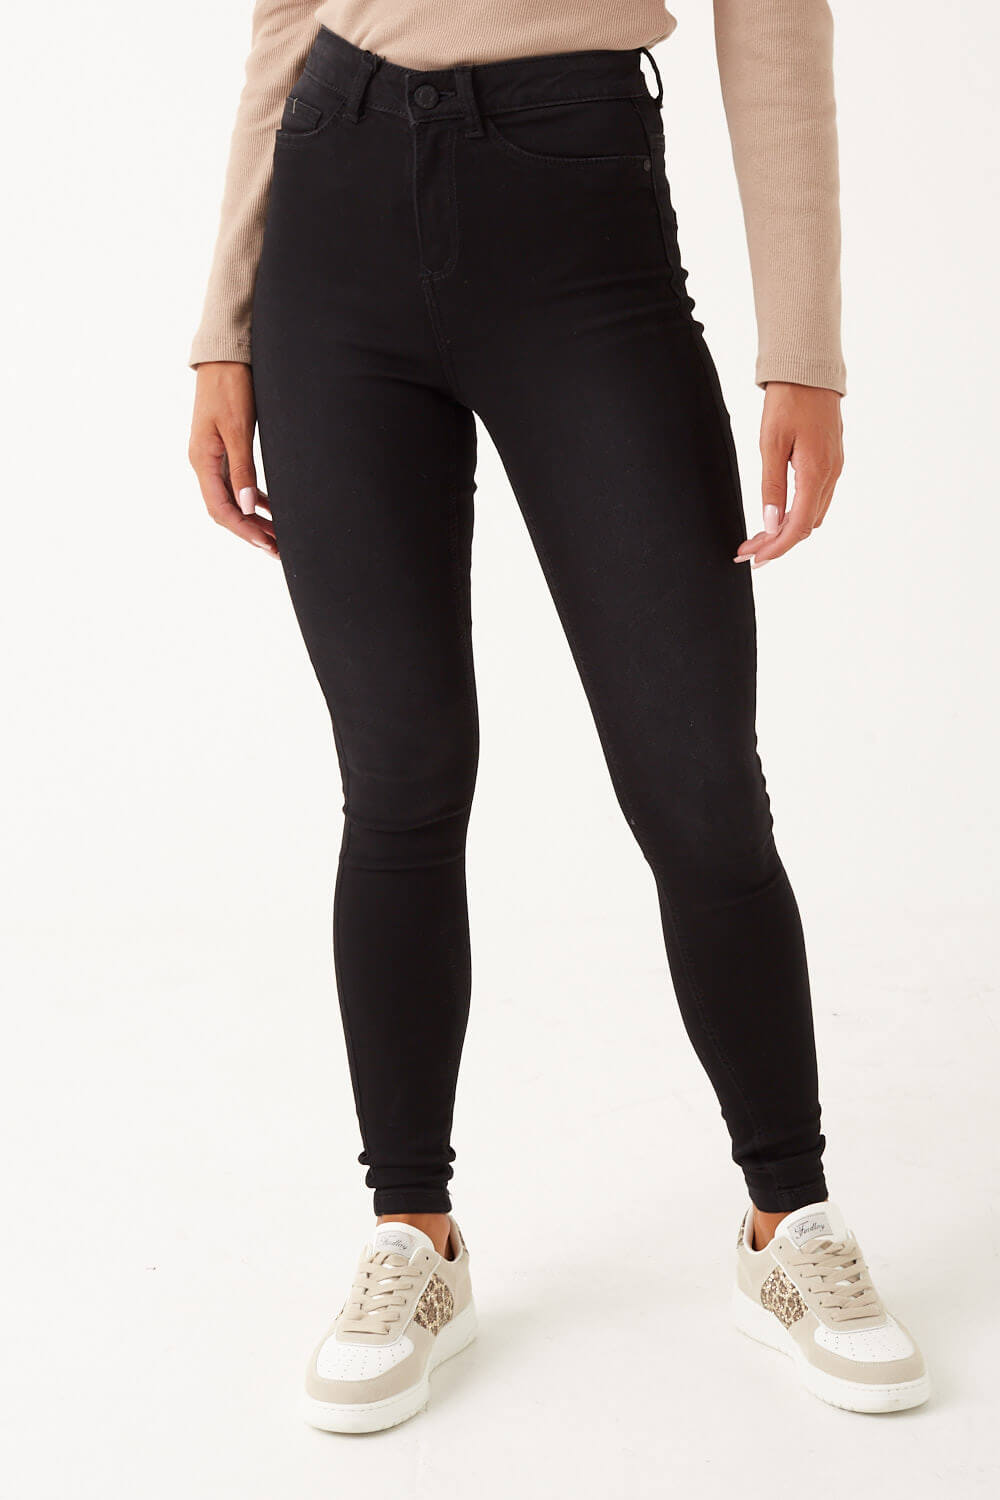 Noisy May Callie High Waist Skinny Jeans in Black | iCLOTHING - iCLOTHING